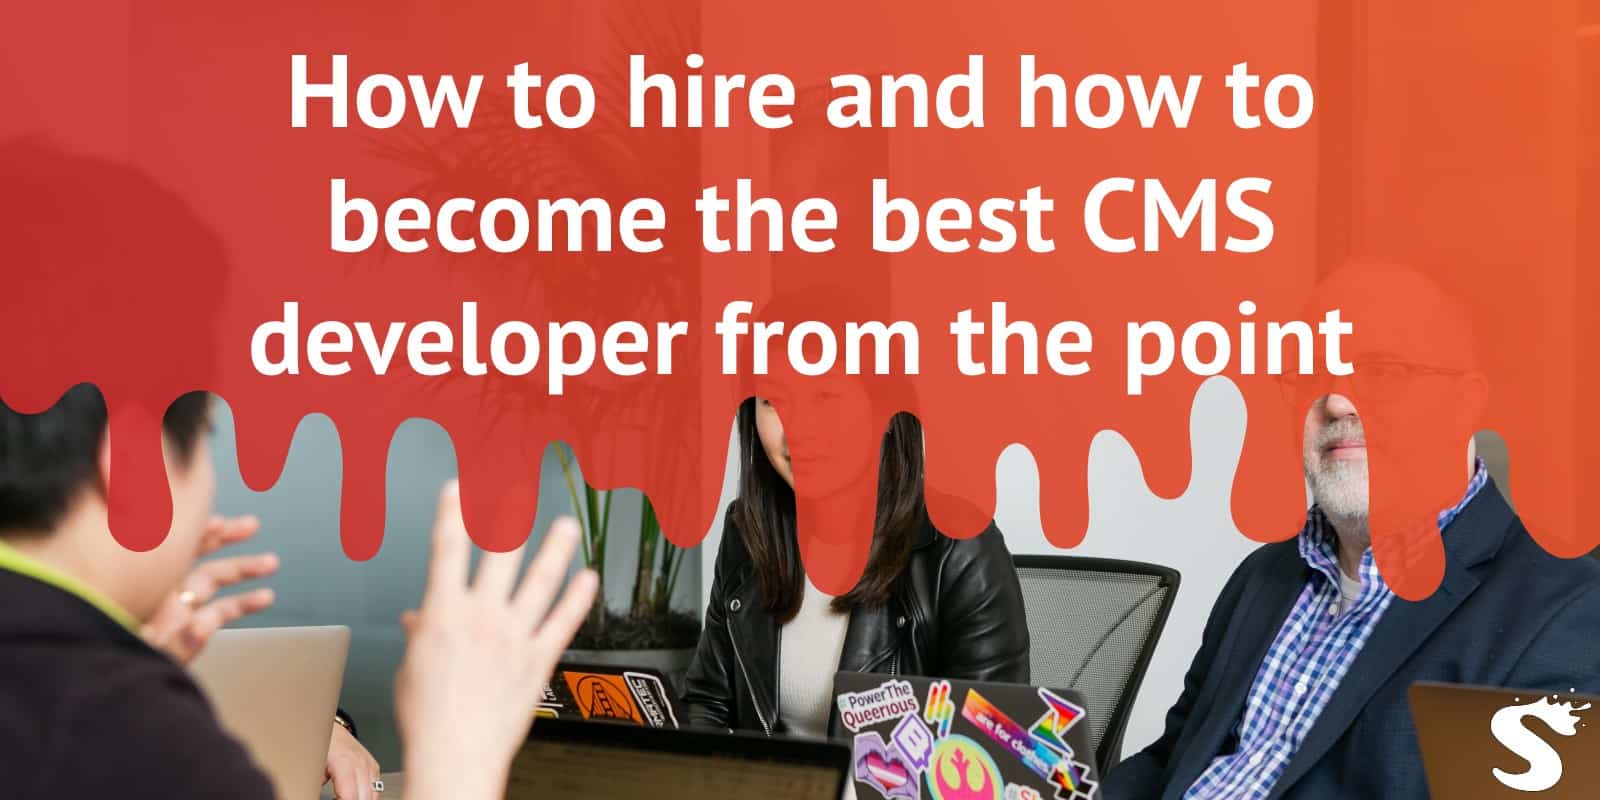 How to hire and how to become the best CMS developer from the point of view of applicants and employers